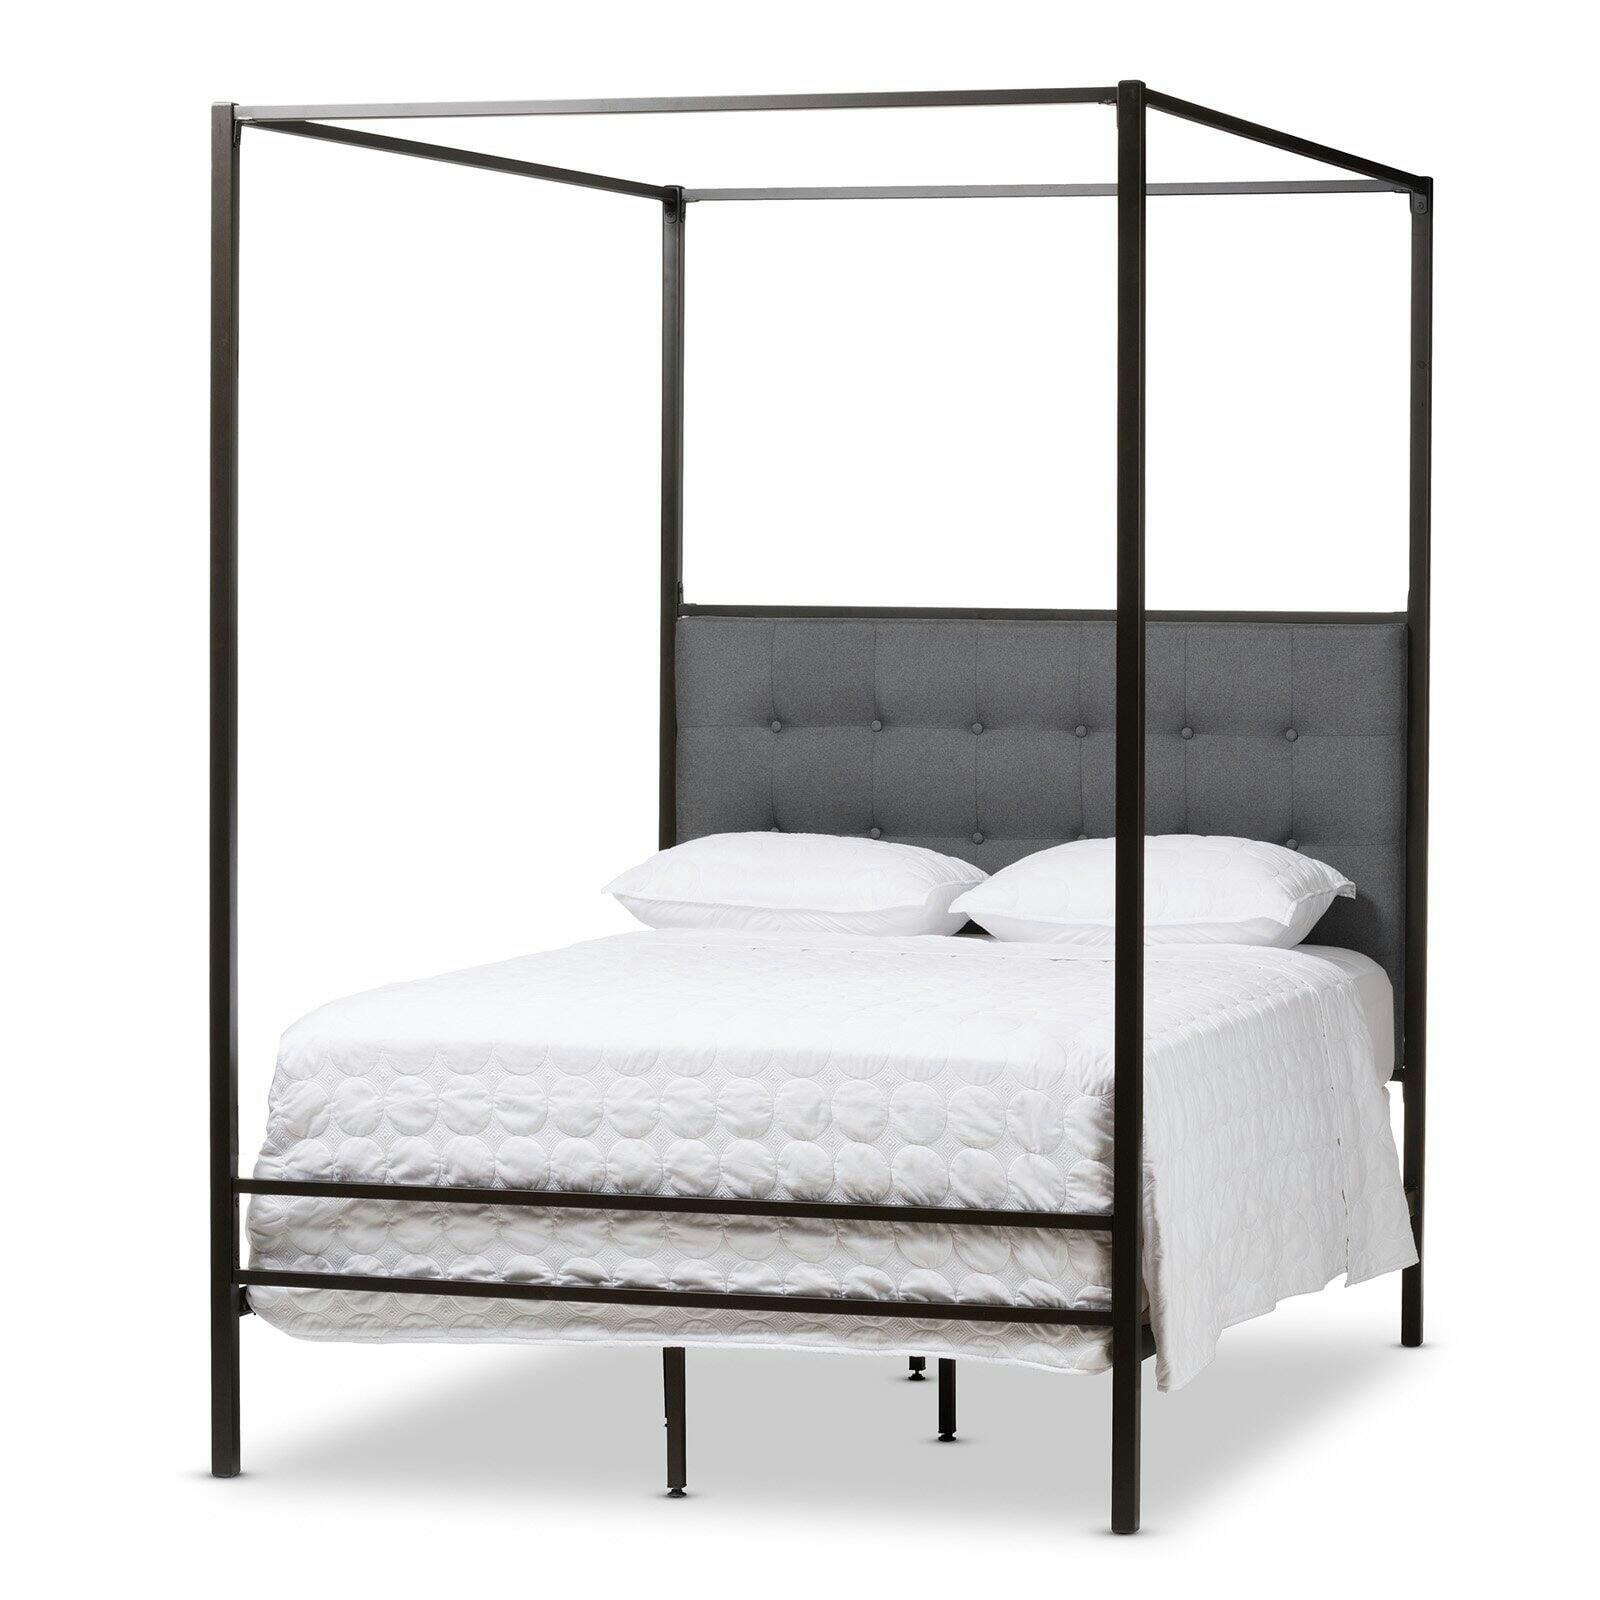 Eleanor Vintage Black Metal Queen Canopy Bed with Tufted Gray Upholstery